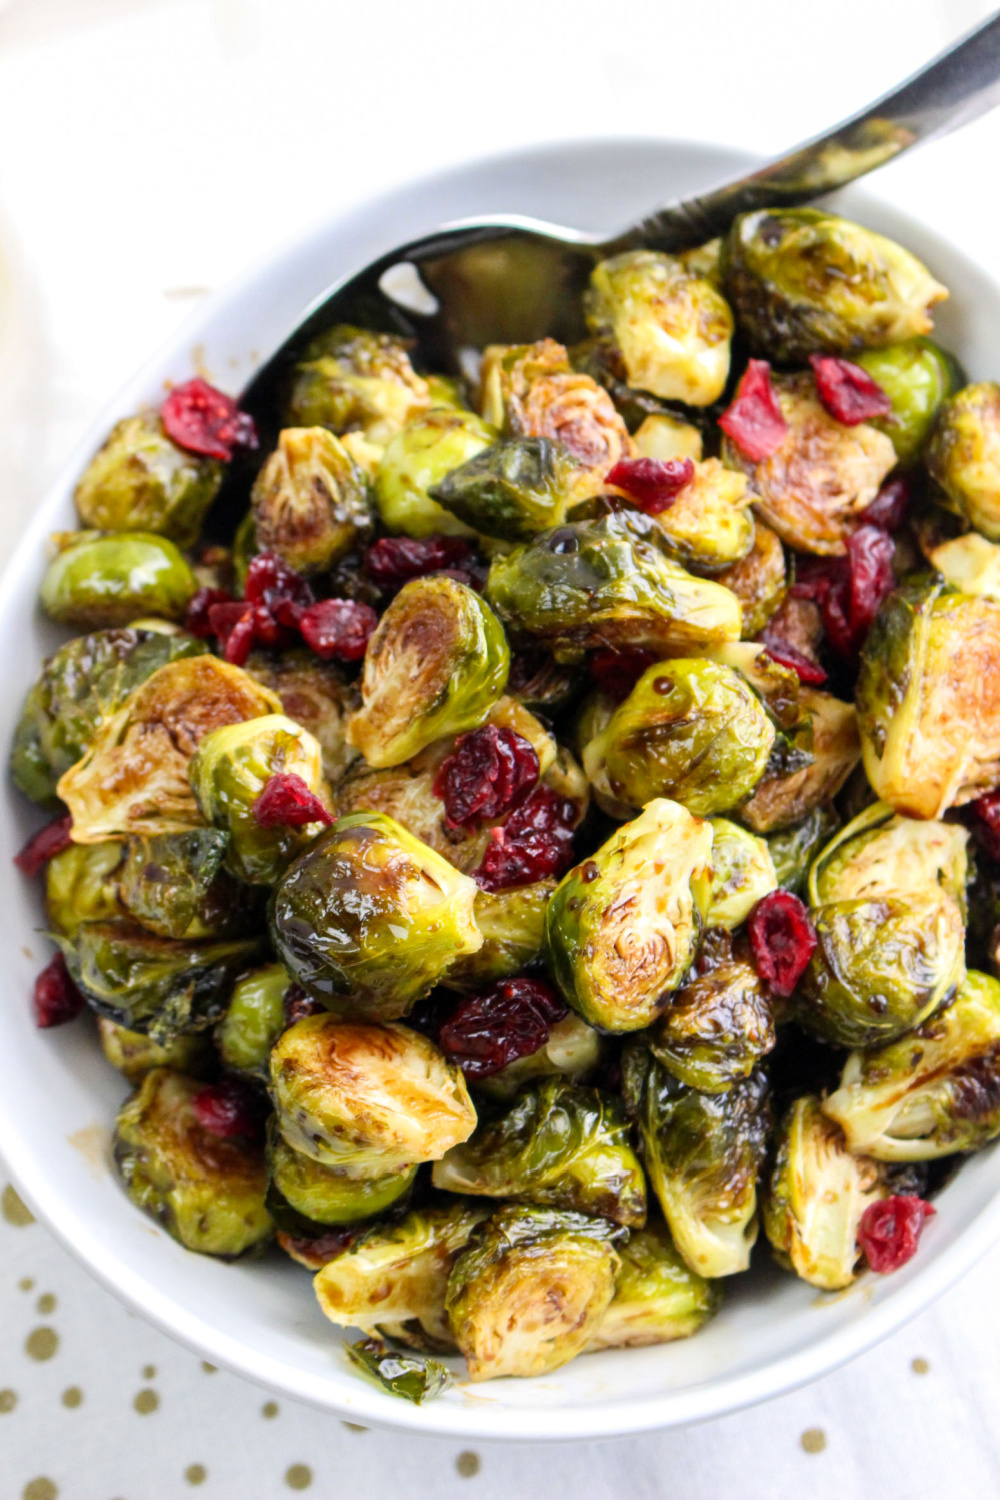 Balsamic Brussel Sprouts and Cranberries in a serving bowl